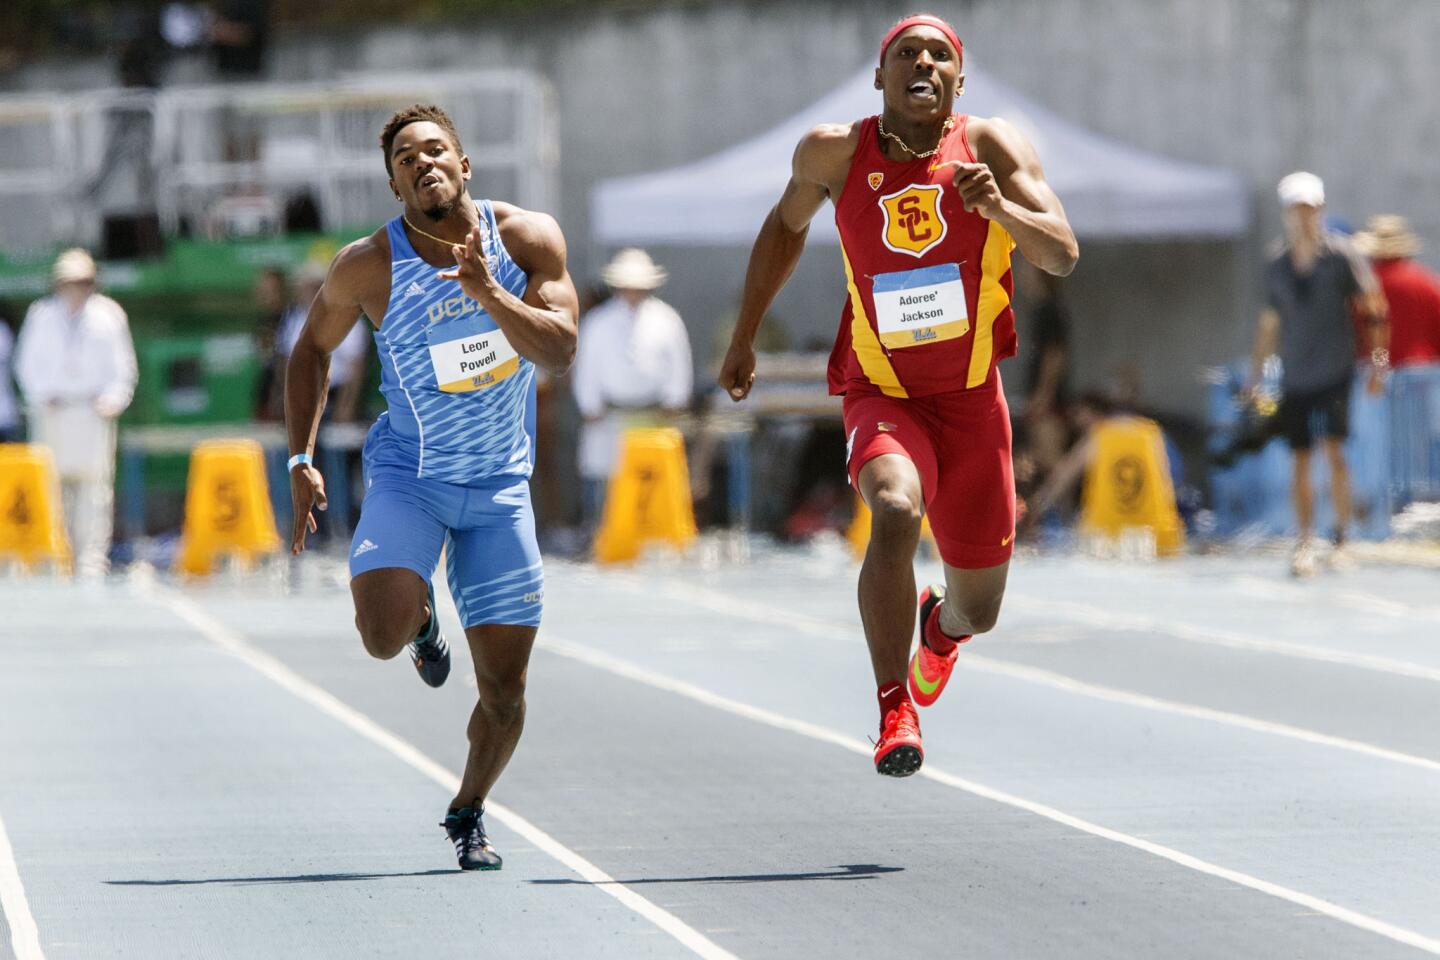 USC sophomore Adoree' Jackson runs past UCLA's Leon Powell in the men's 100m dash during the UCLA vs. USC Track and Field dual meet.